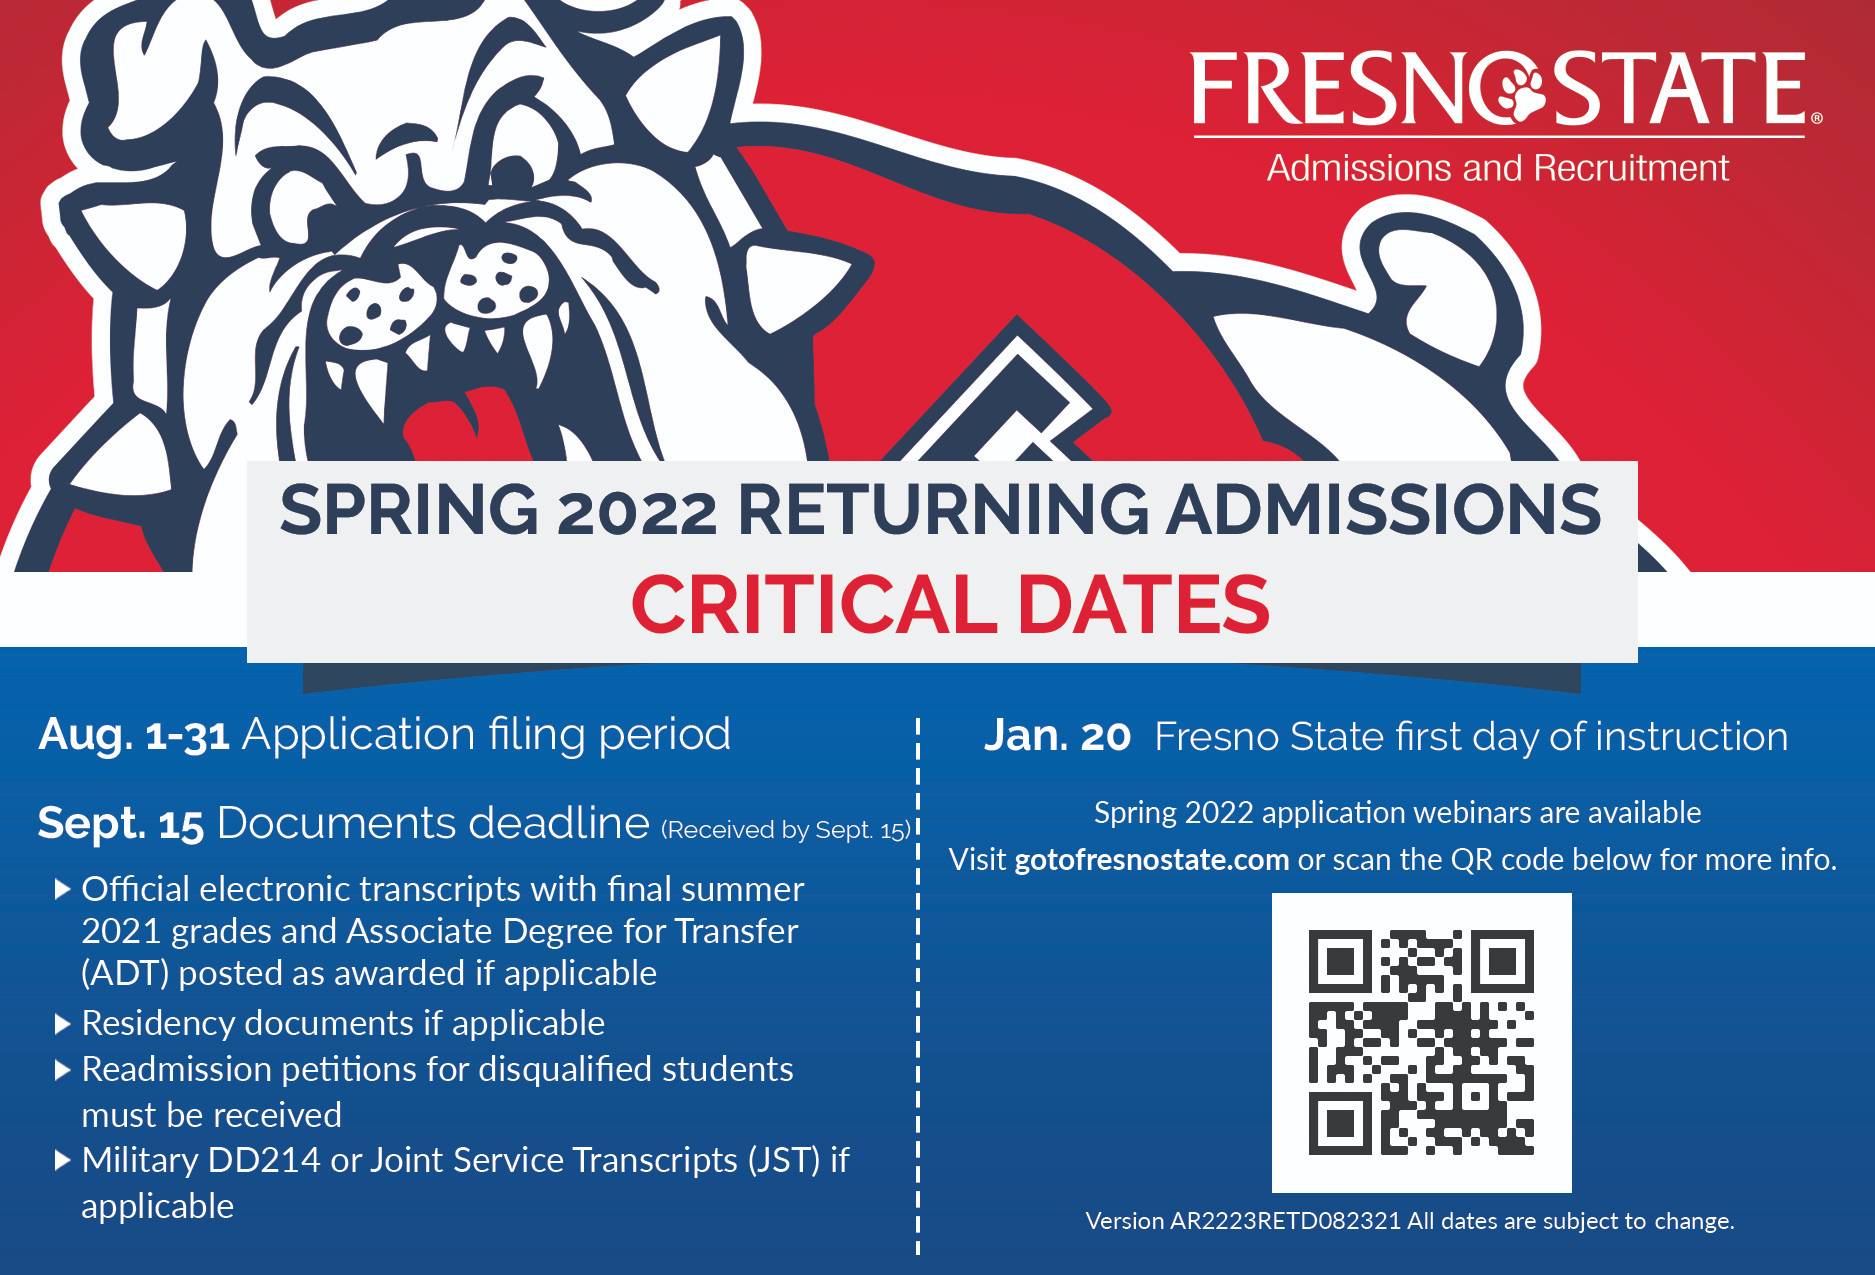 Fresno State Calendar Spring 2022 Returning - Admissions And Recruitment